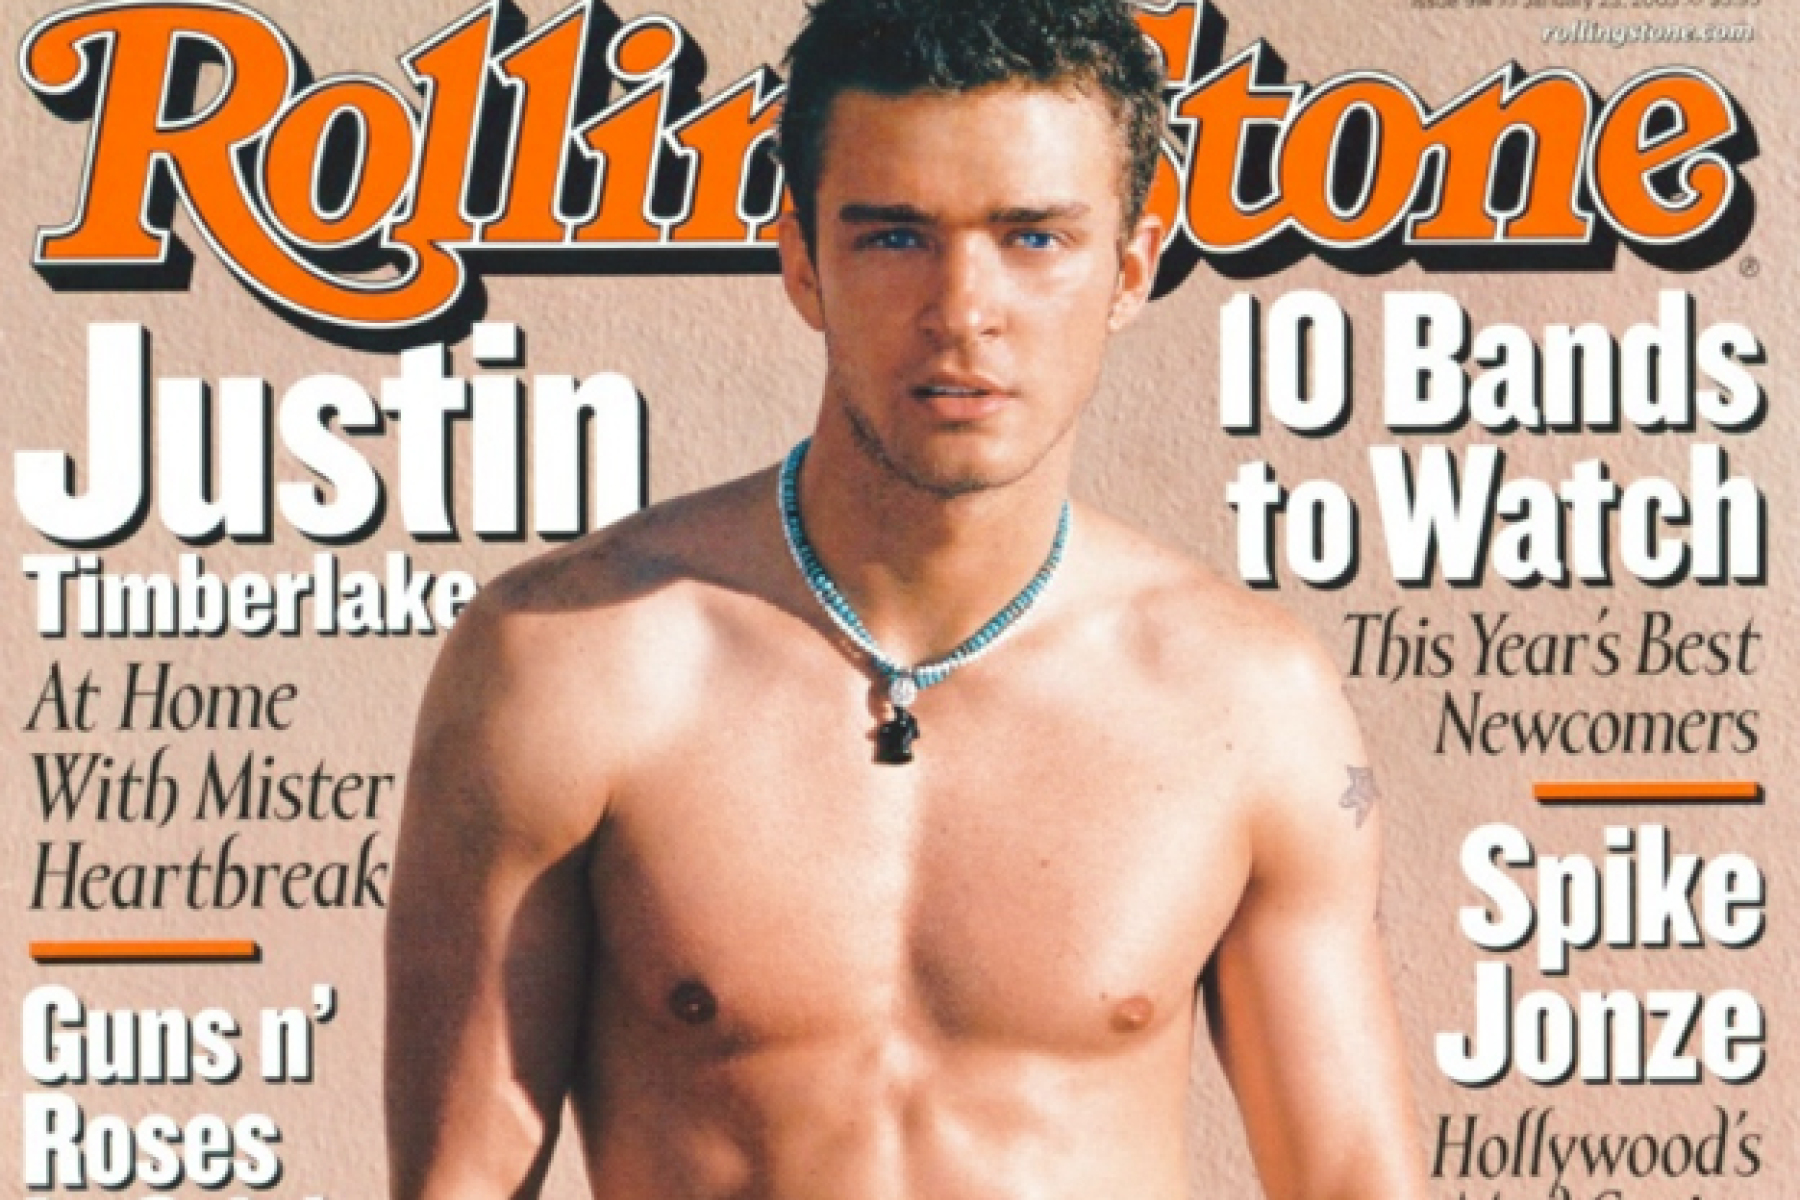 On January 23rd, 2003, we saw Justin Timberlake’s first solo Roll...